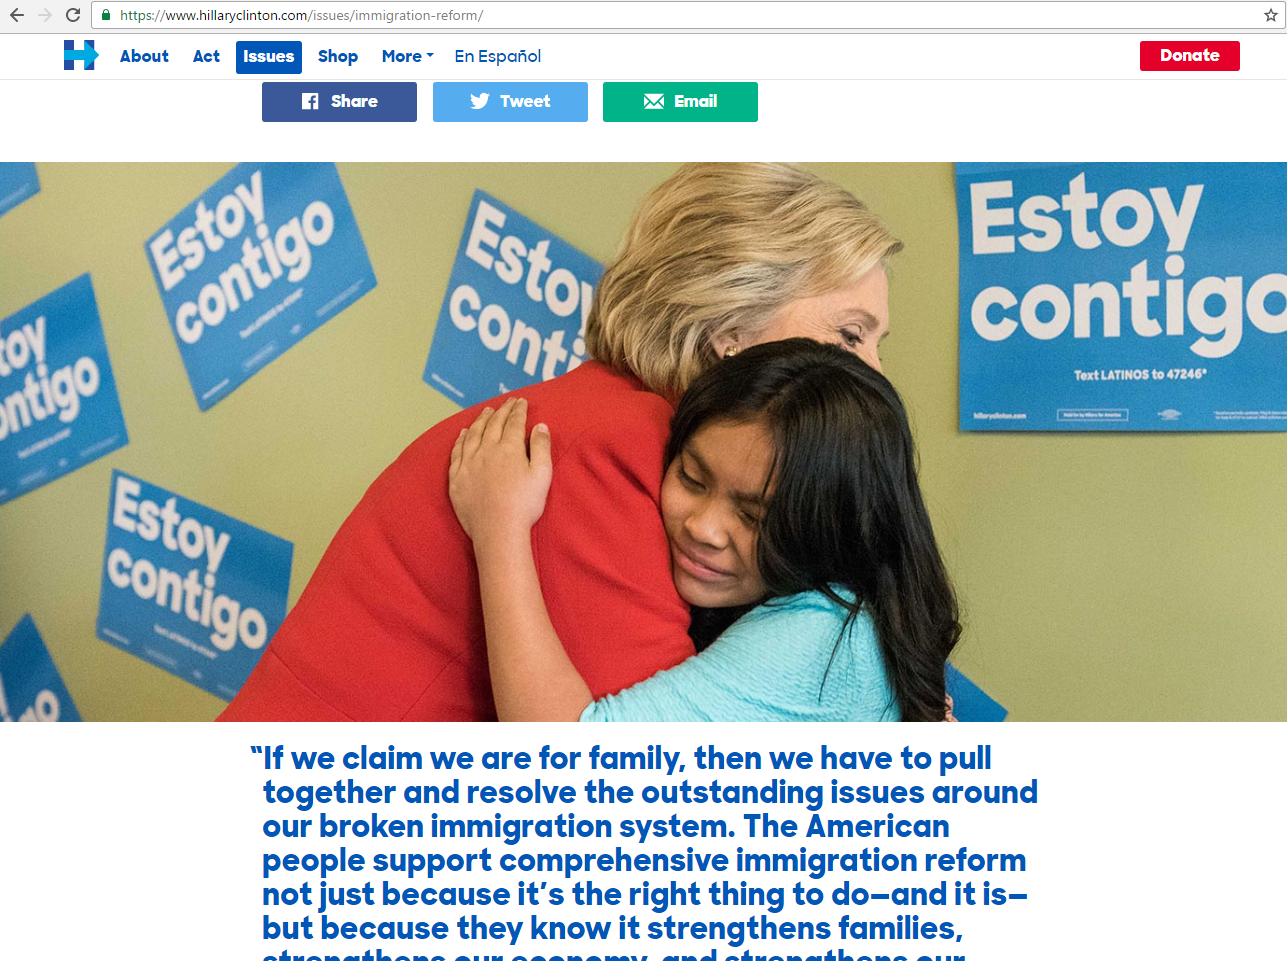 Screenshot of Hillary Clinton’s Immigration Reform Webpage